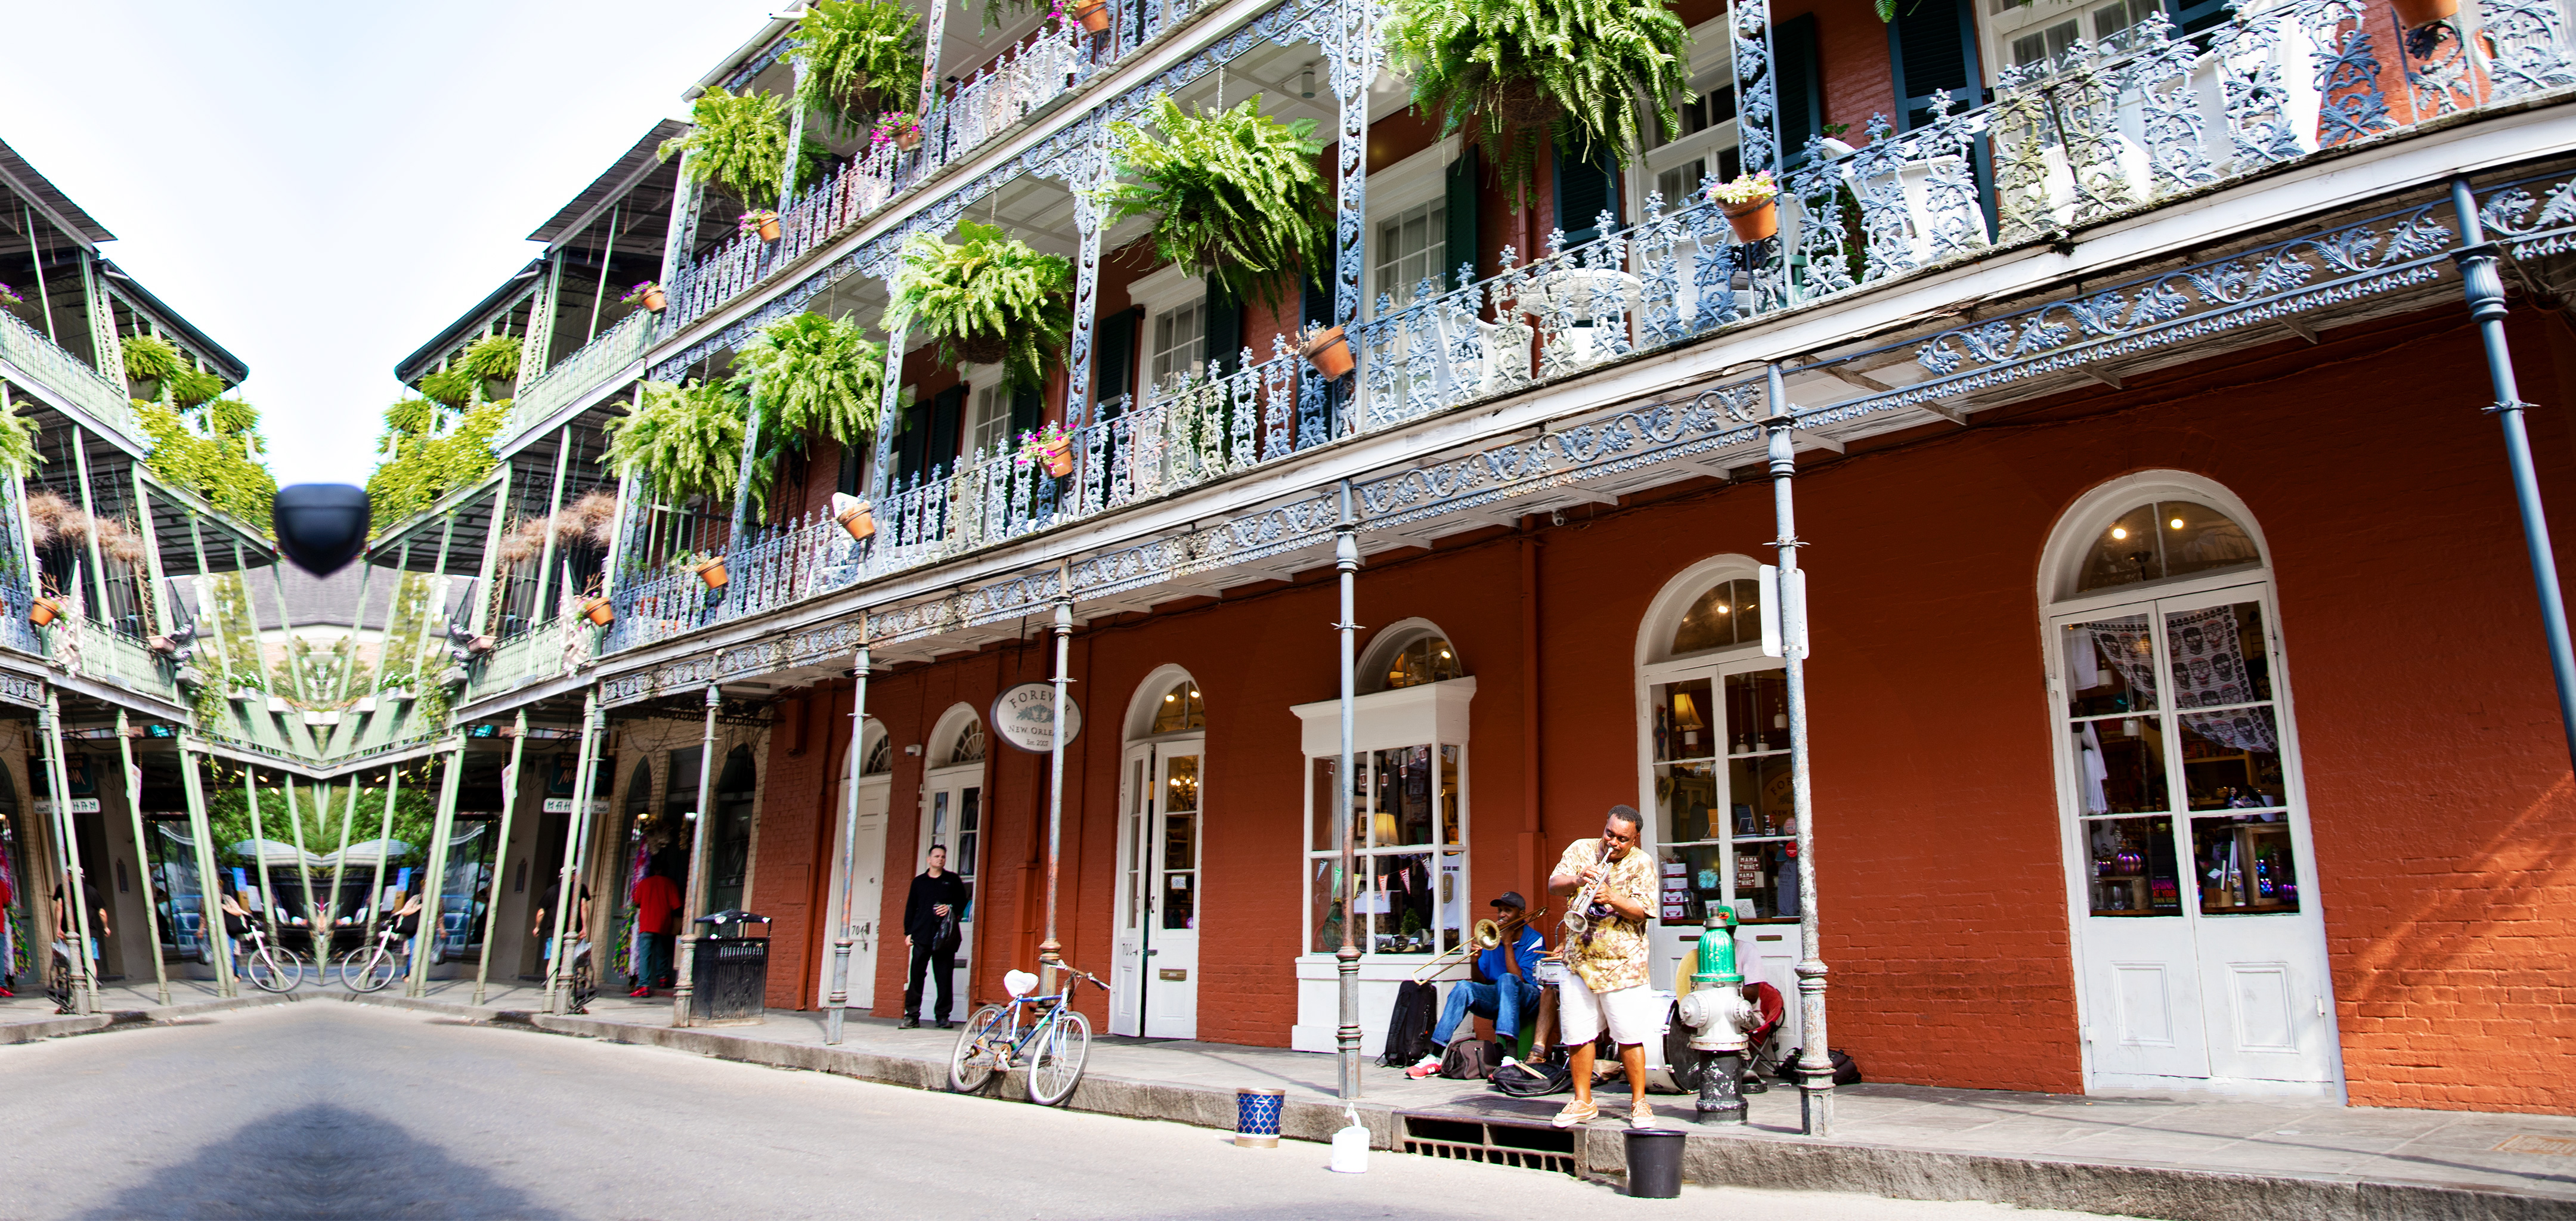 7 Must-See Historical Sites in New Orleans - Hotel Monteleone